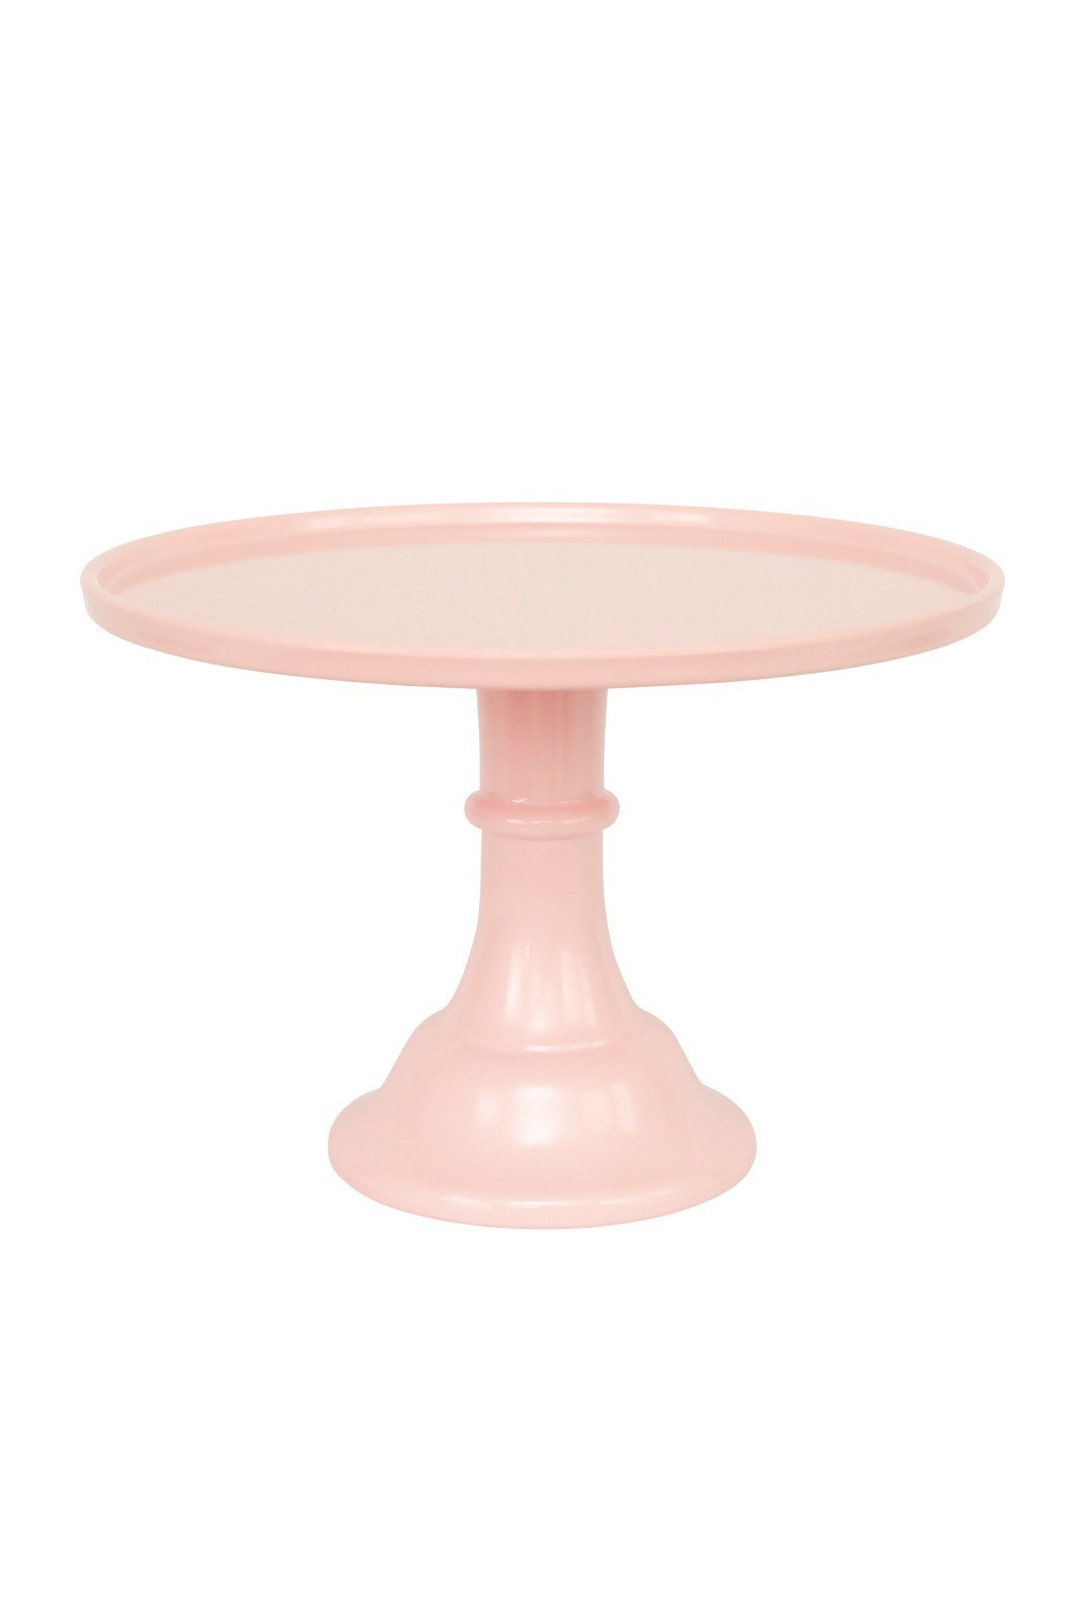 Melamine Cake Stand with Dots Print – Corner Store